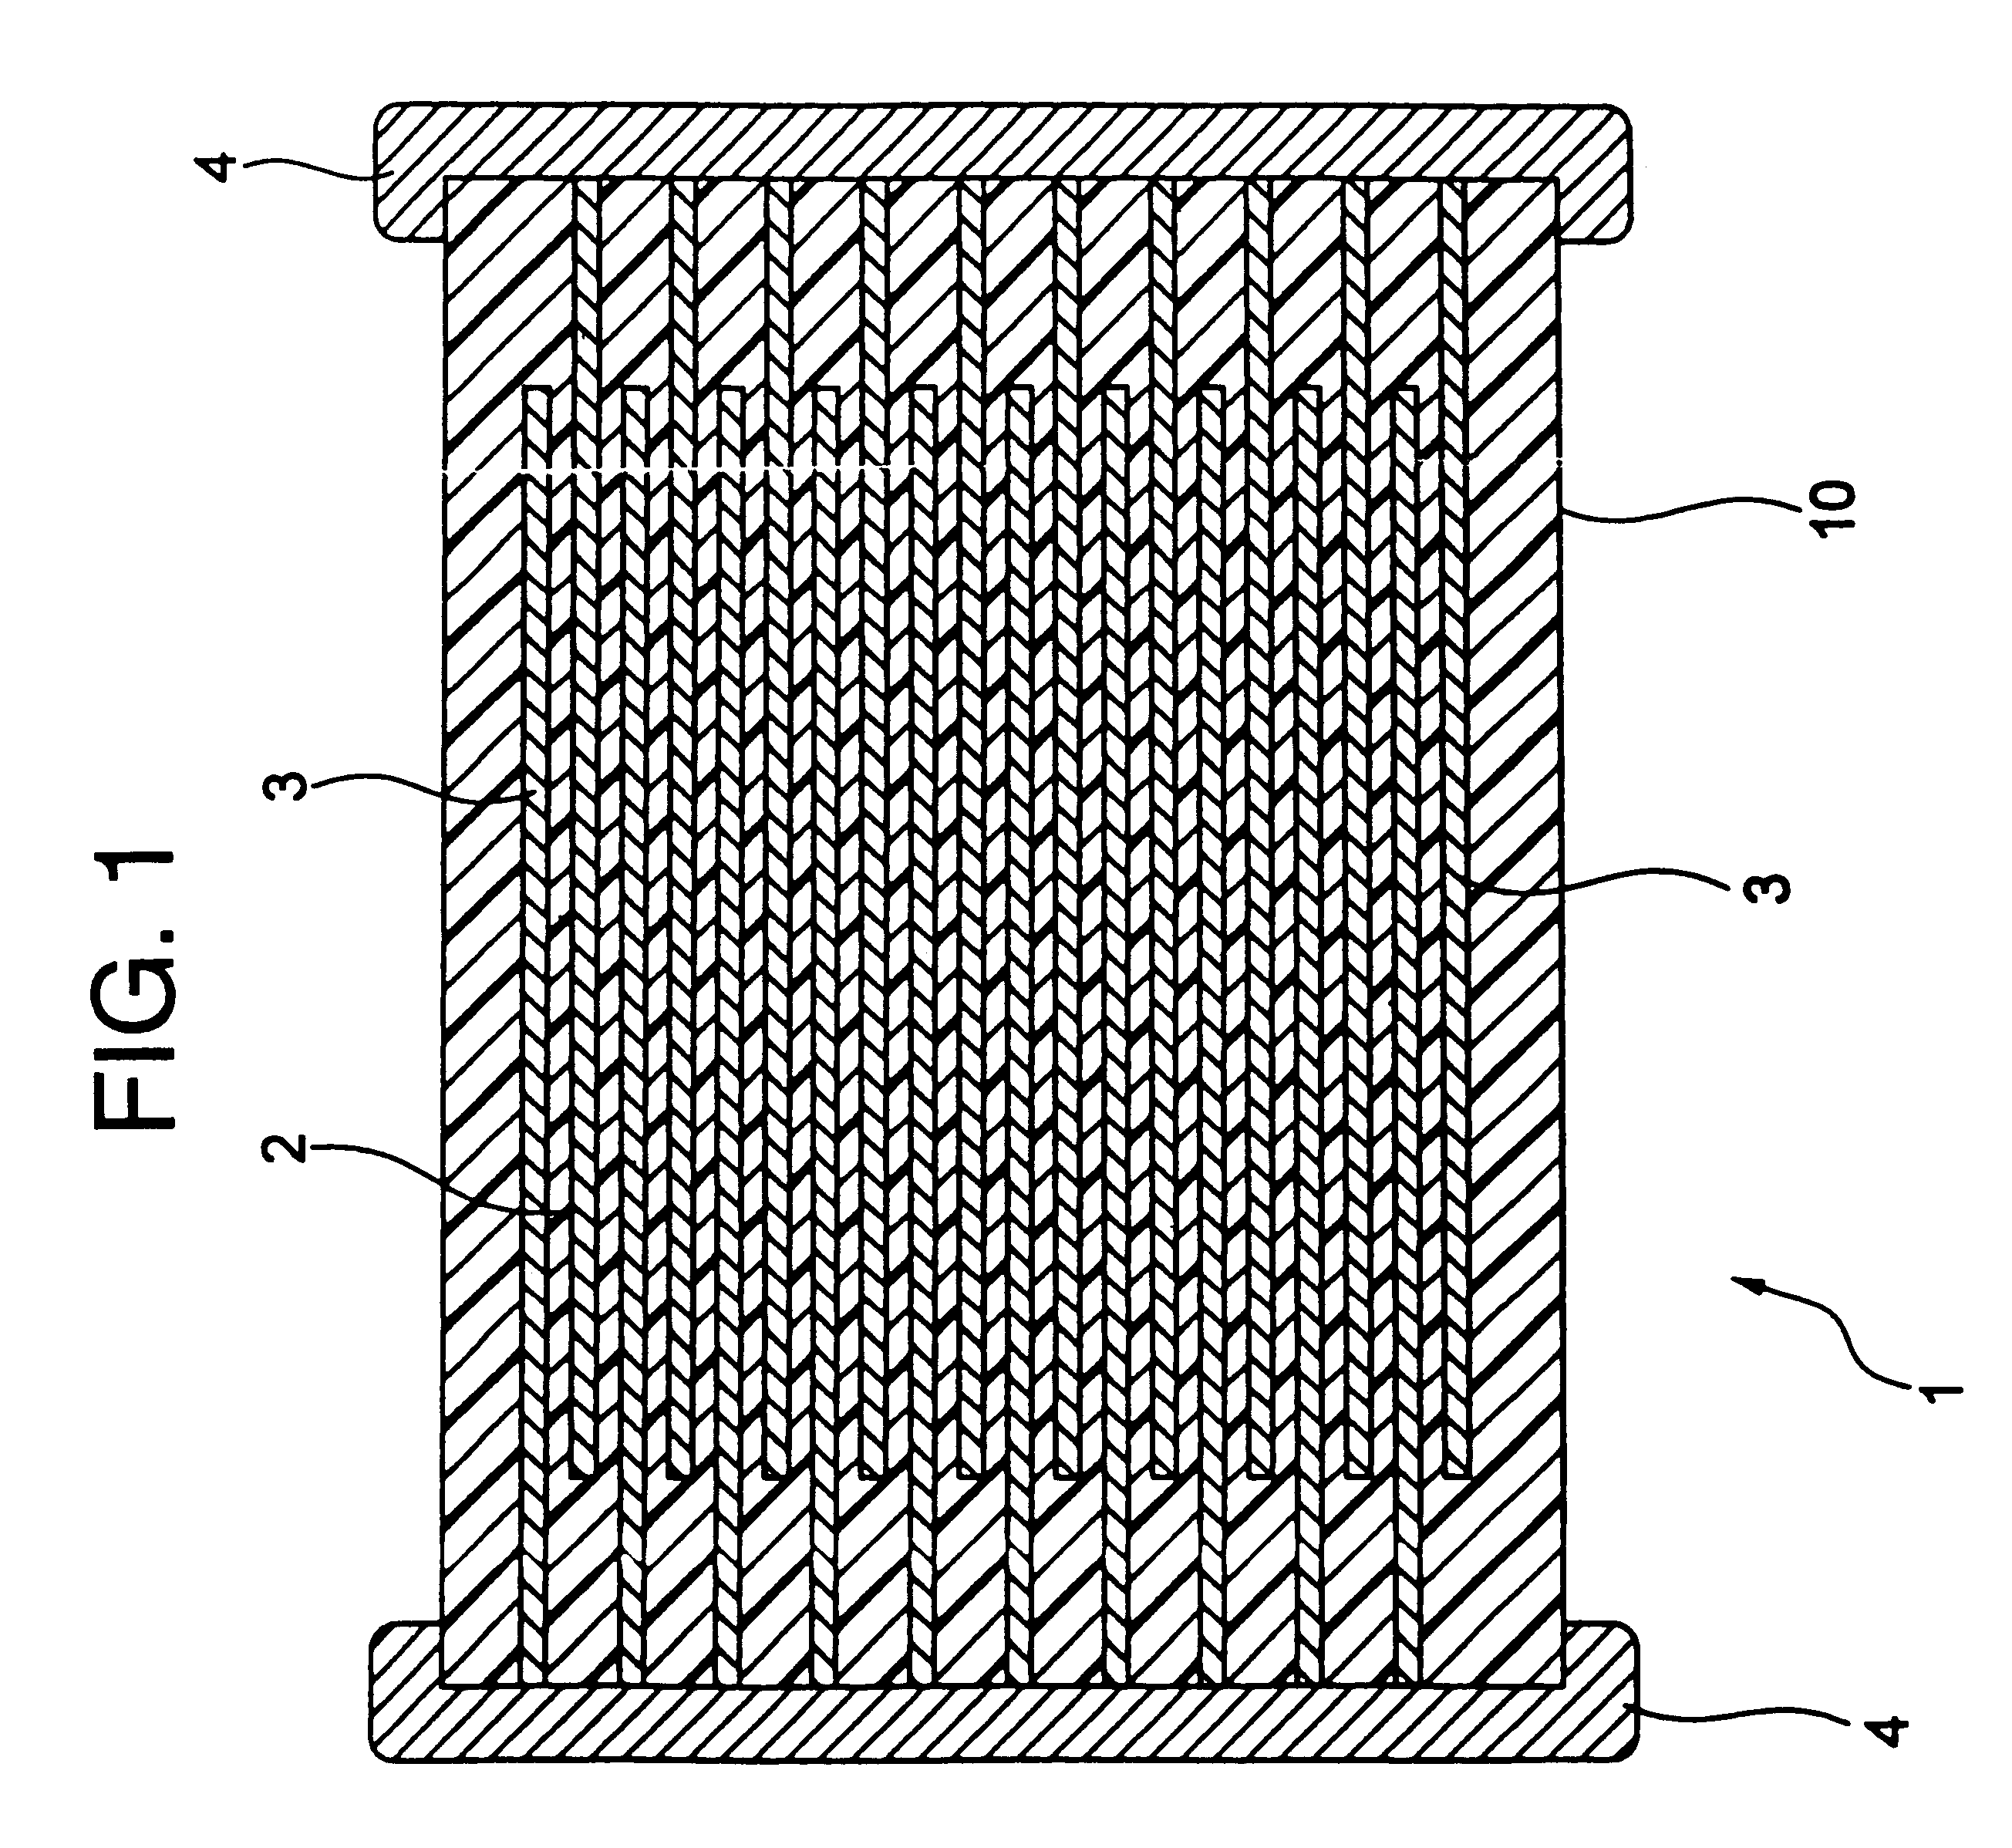 Manufacture method of dielectric ceramic composition